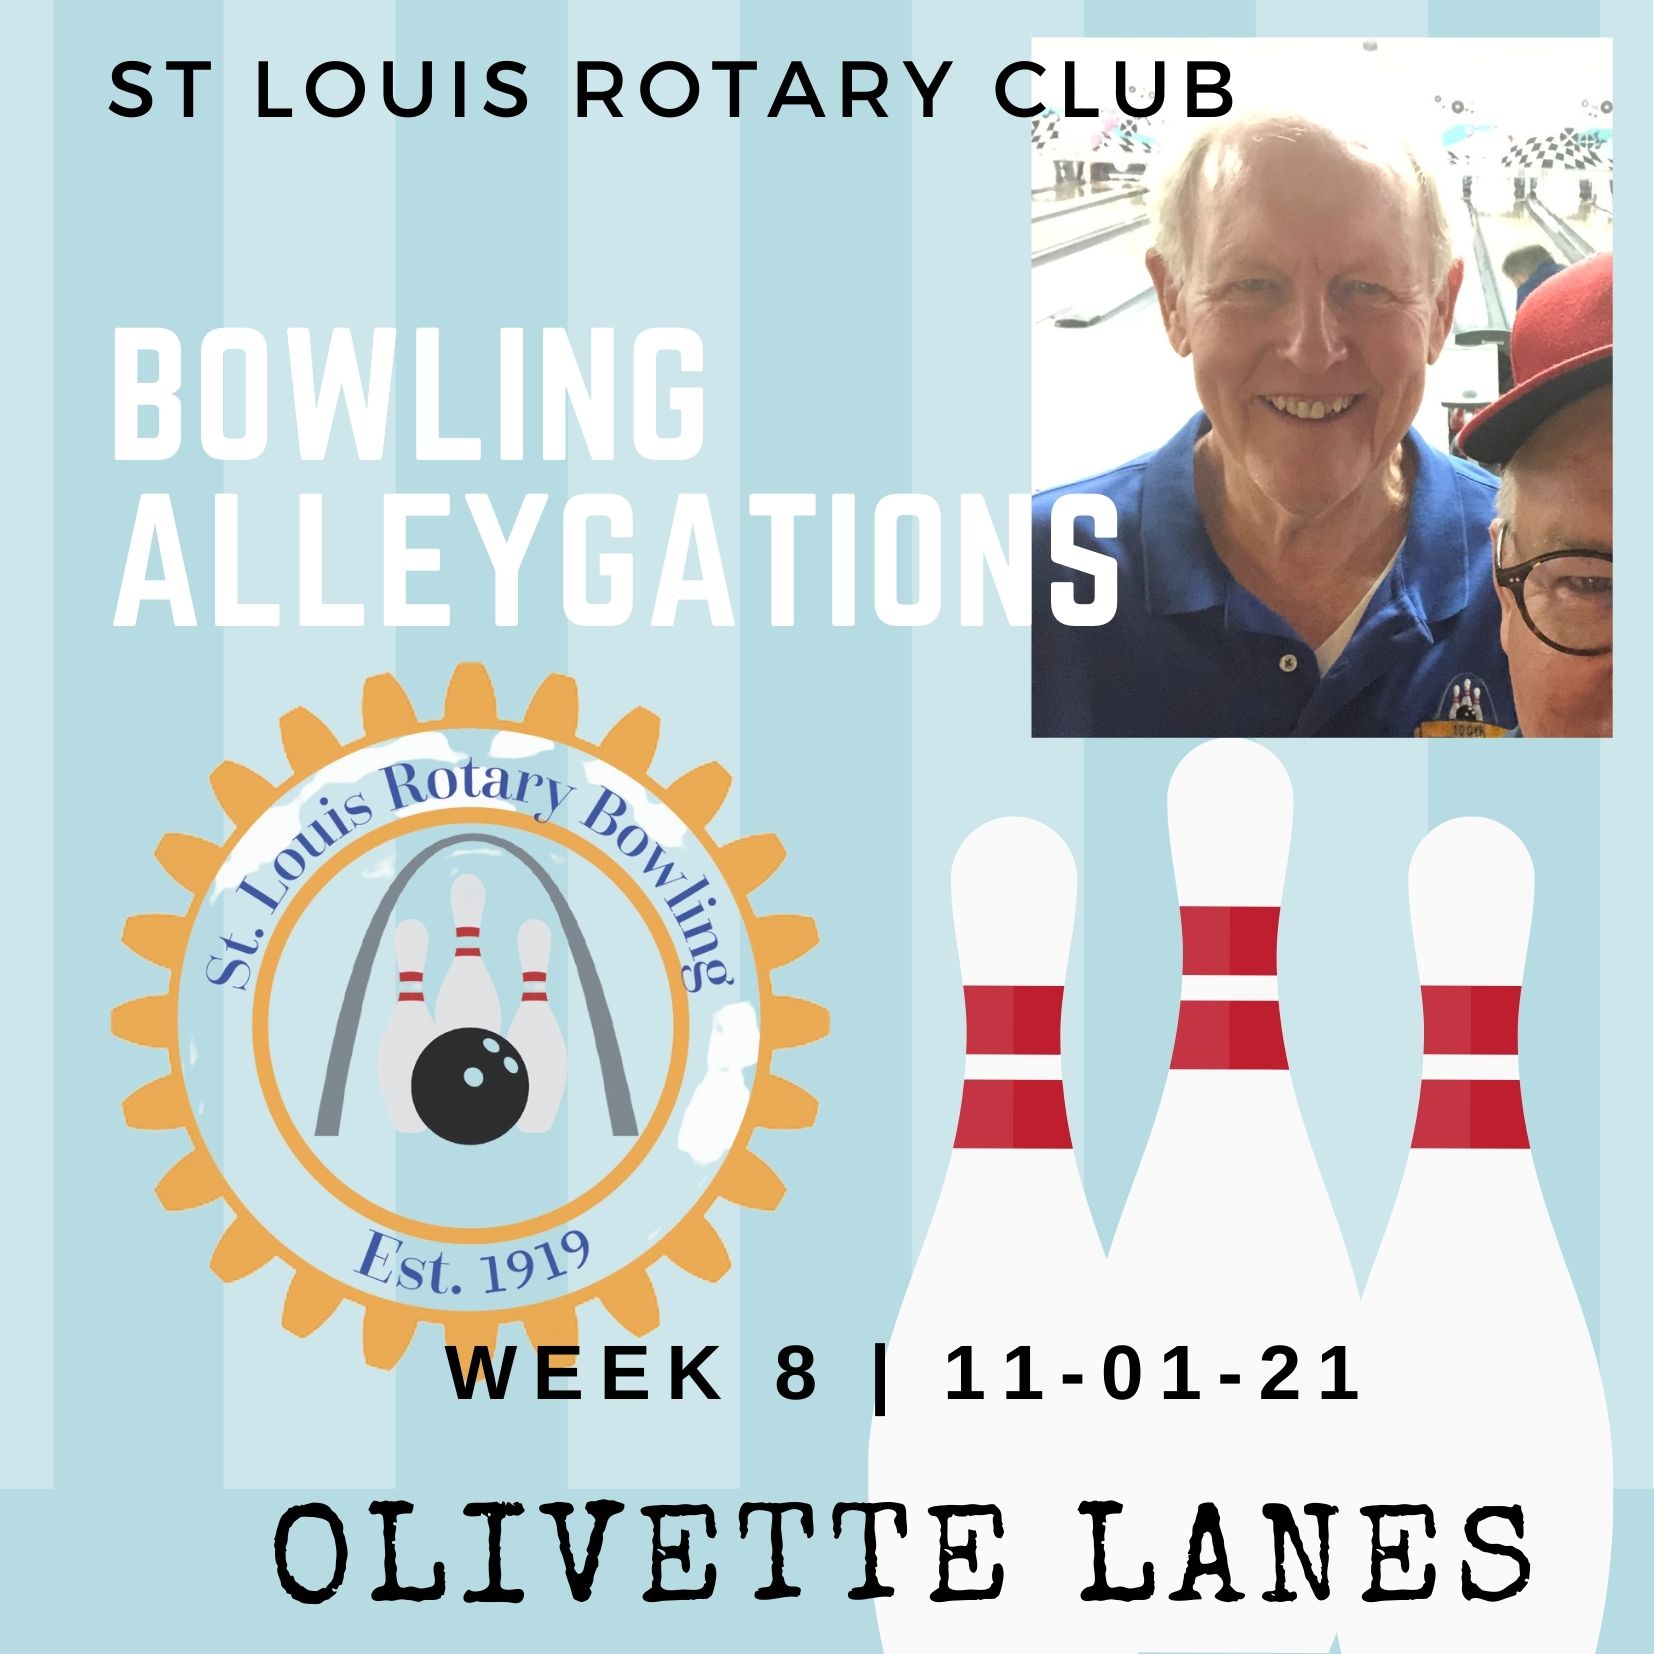 Bowling Alleygations Week 8 11-1-21